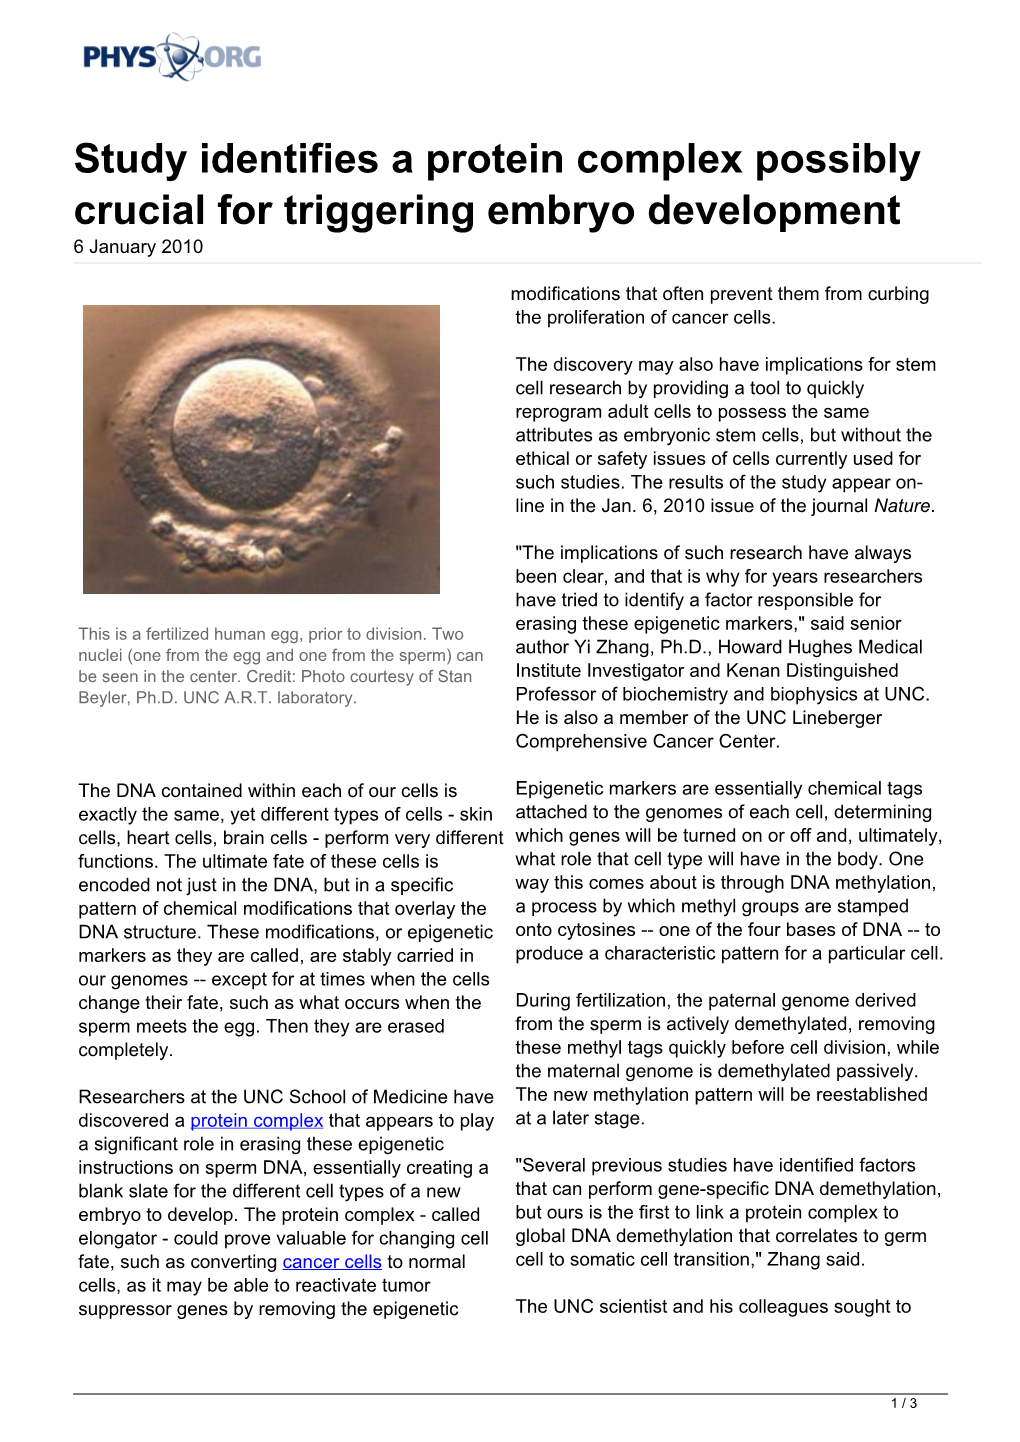 Study Identifies a Protein Complex Possibly Crucial for Triggering Embryo Development 6 January 2010